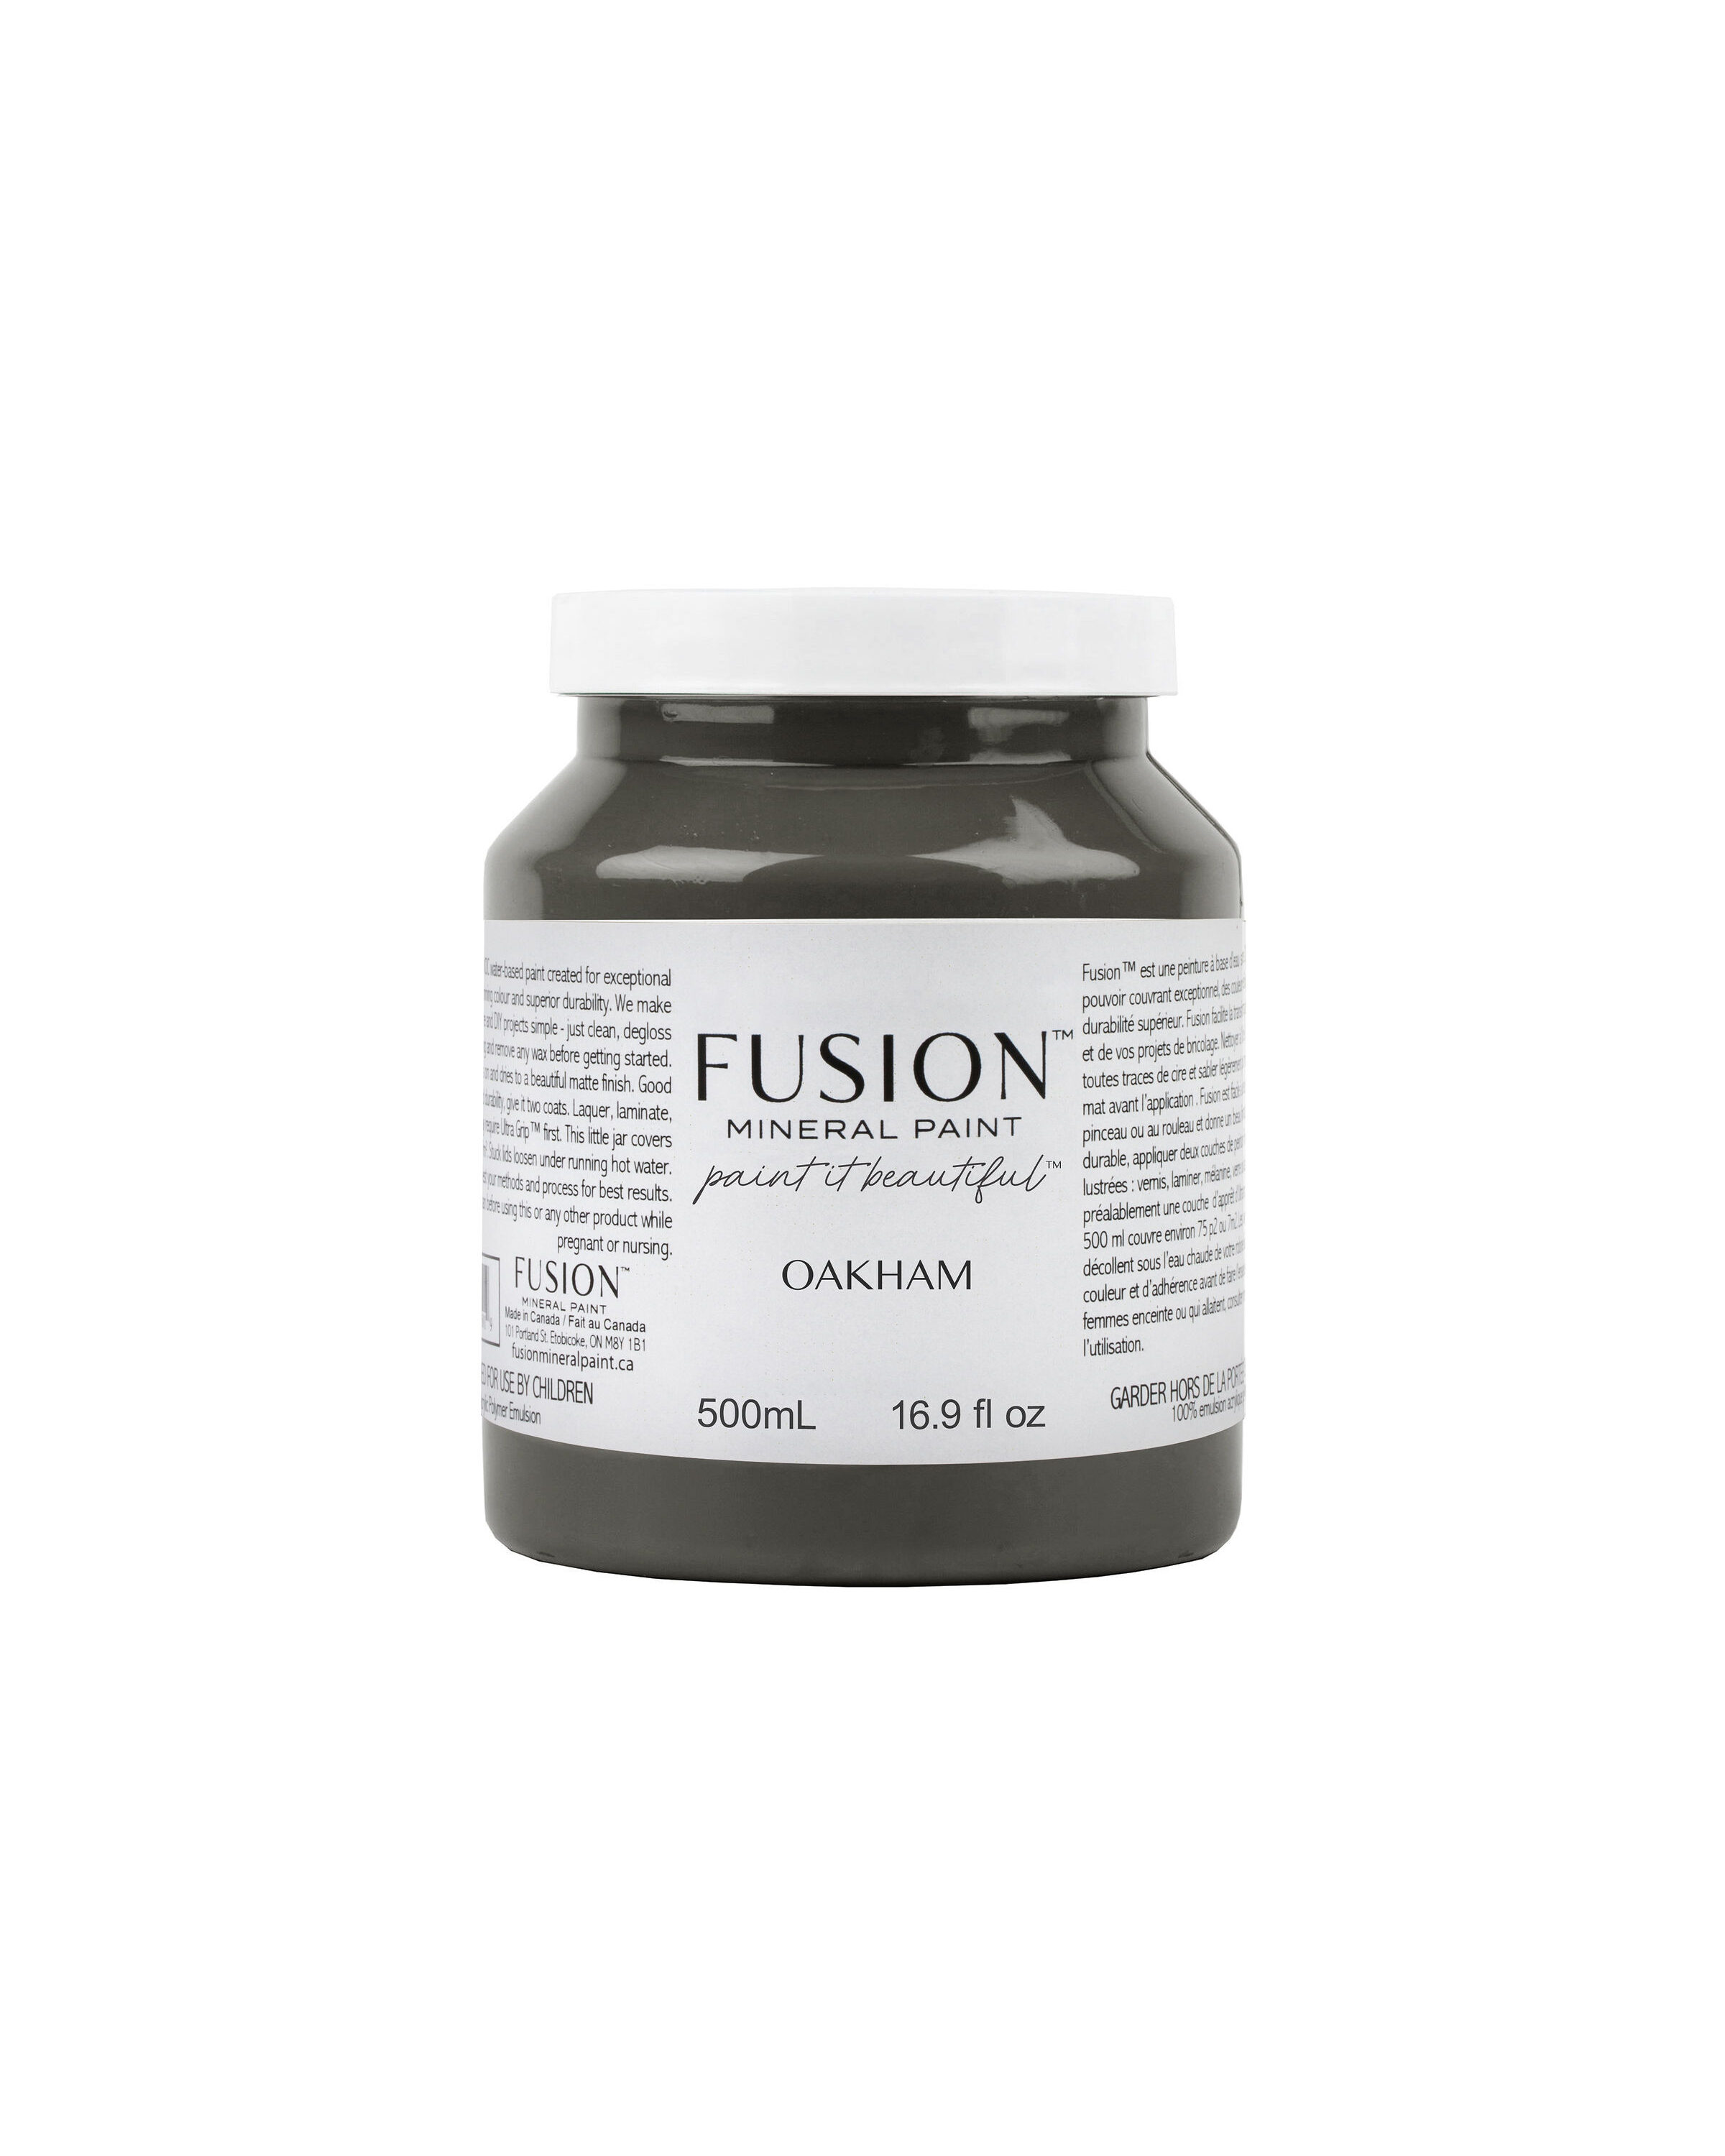 Fusion Mineral Paint vernice ecologica color verde scuro